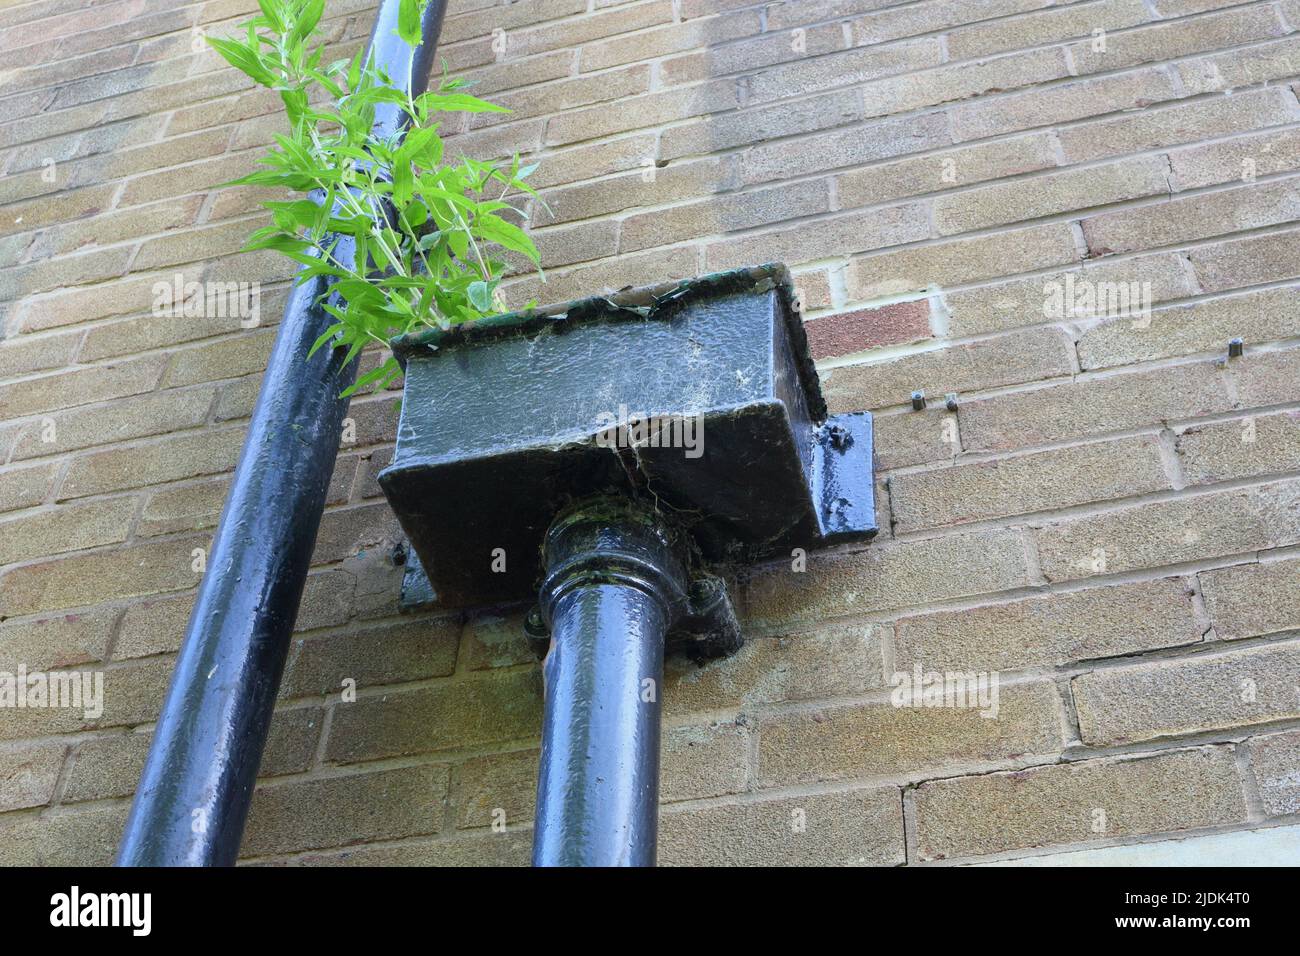 Drain pipe, rainwater hopper, with crack in metal surface, and weeds growing from it. Stock Photo